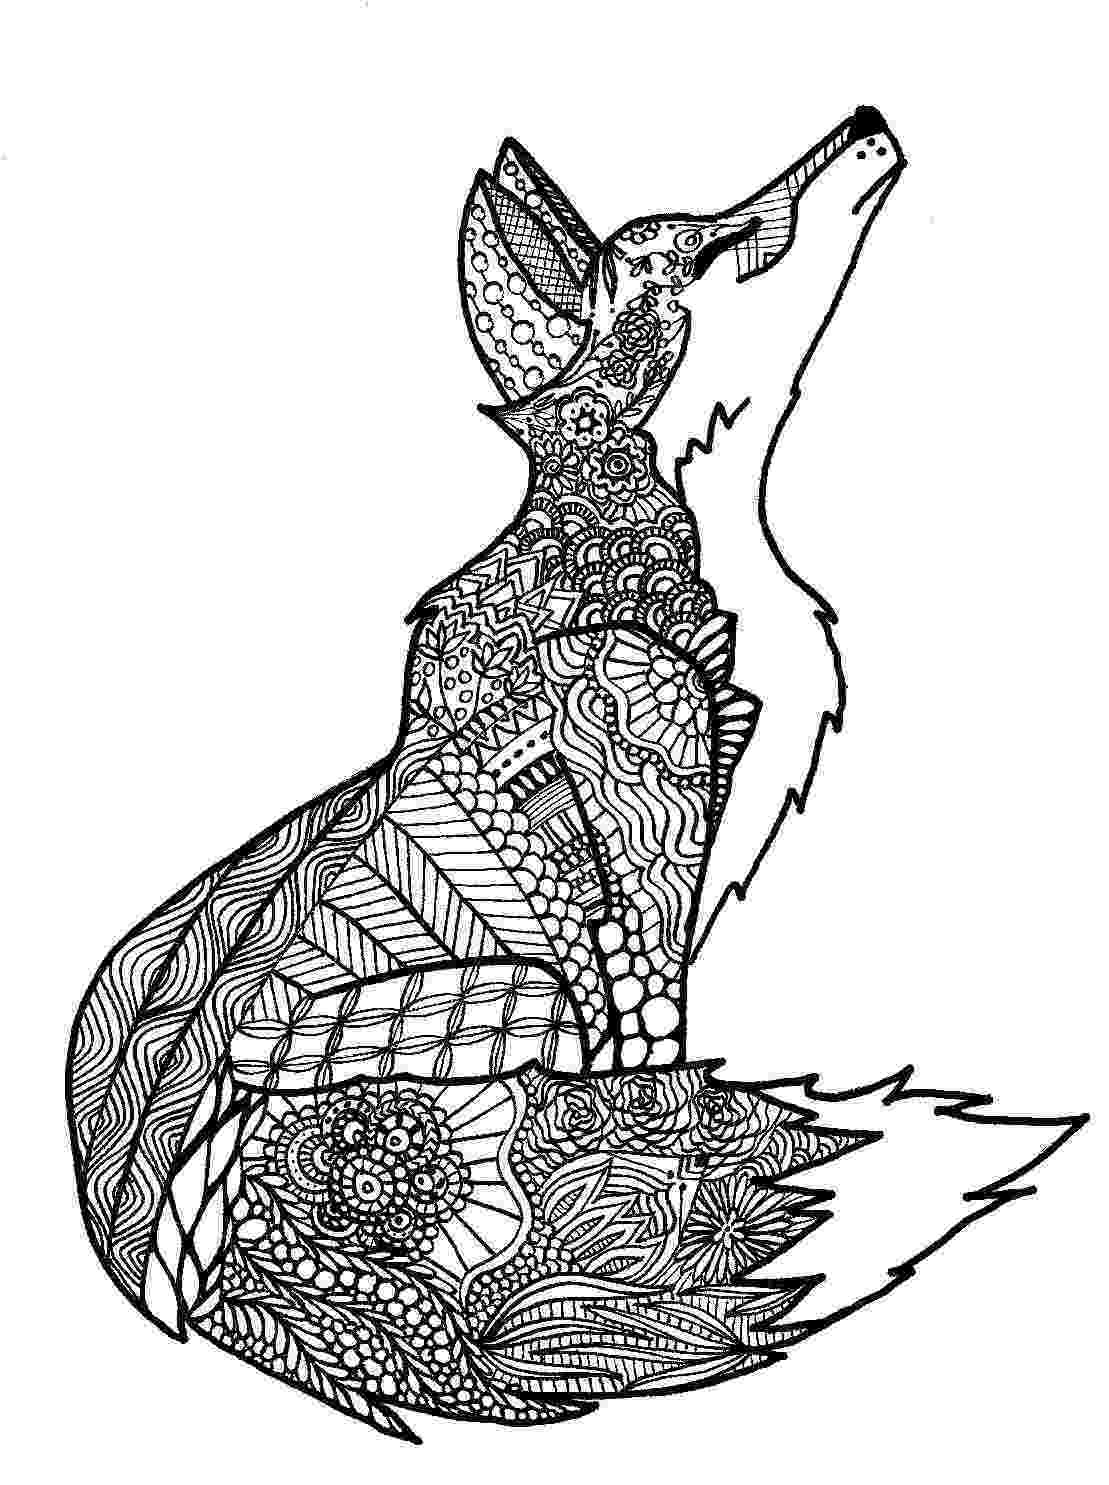 color zentangle kearney woman39s zentangle coloring book stems from her color zentangle 